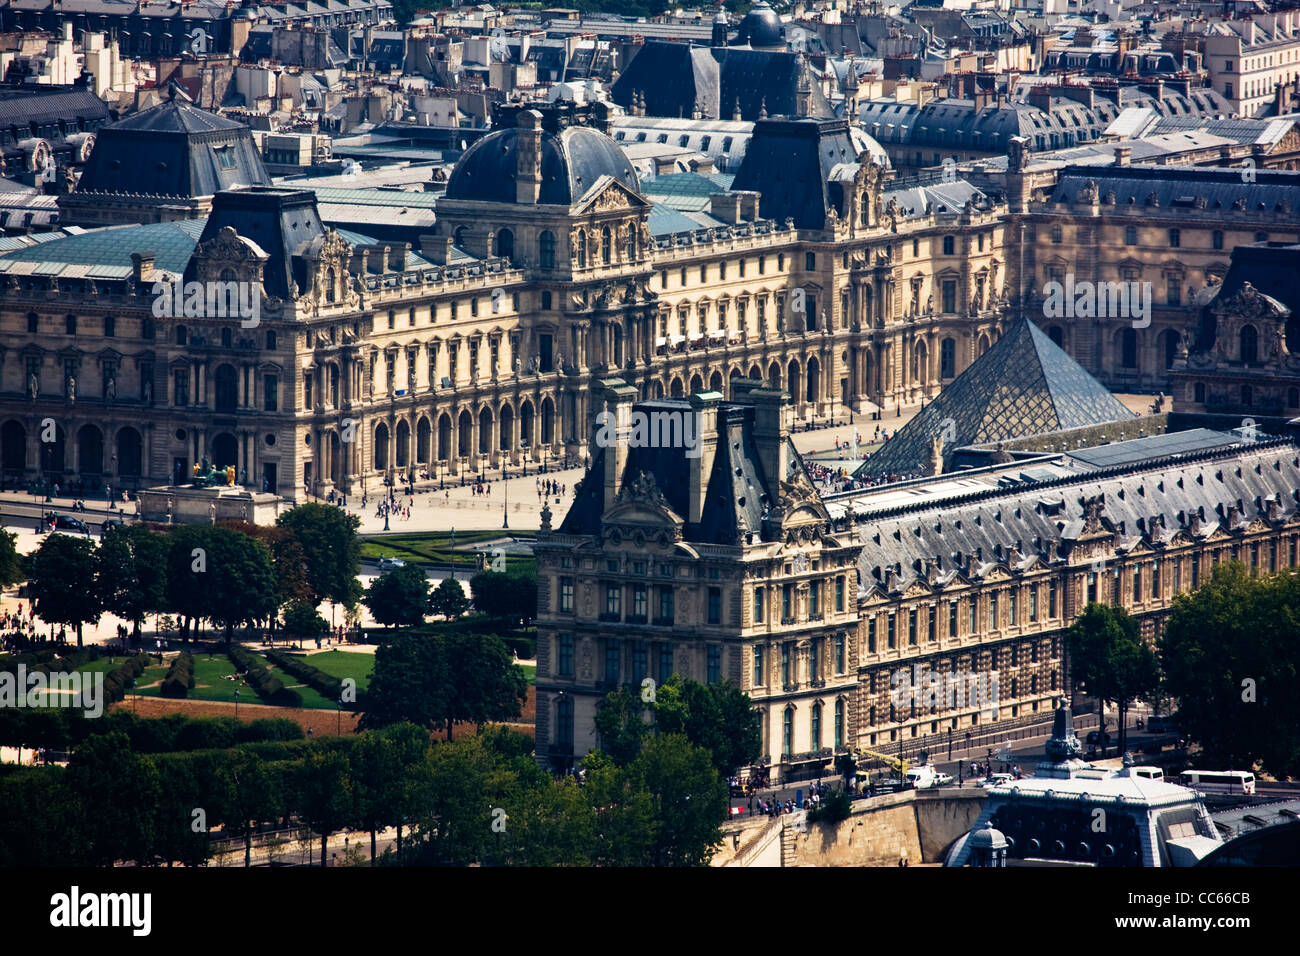 Musee du Louvre seen from Eiffel Tower, Paris, France Stock Photo